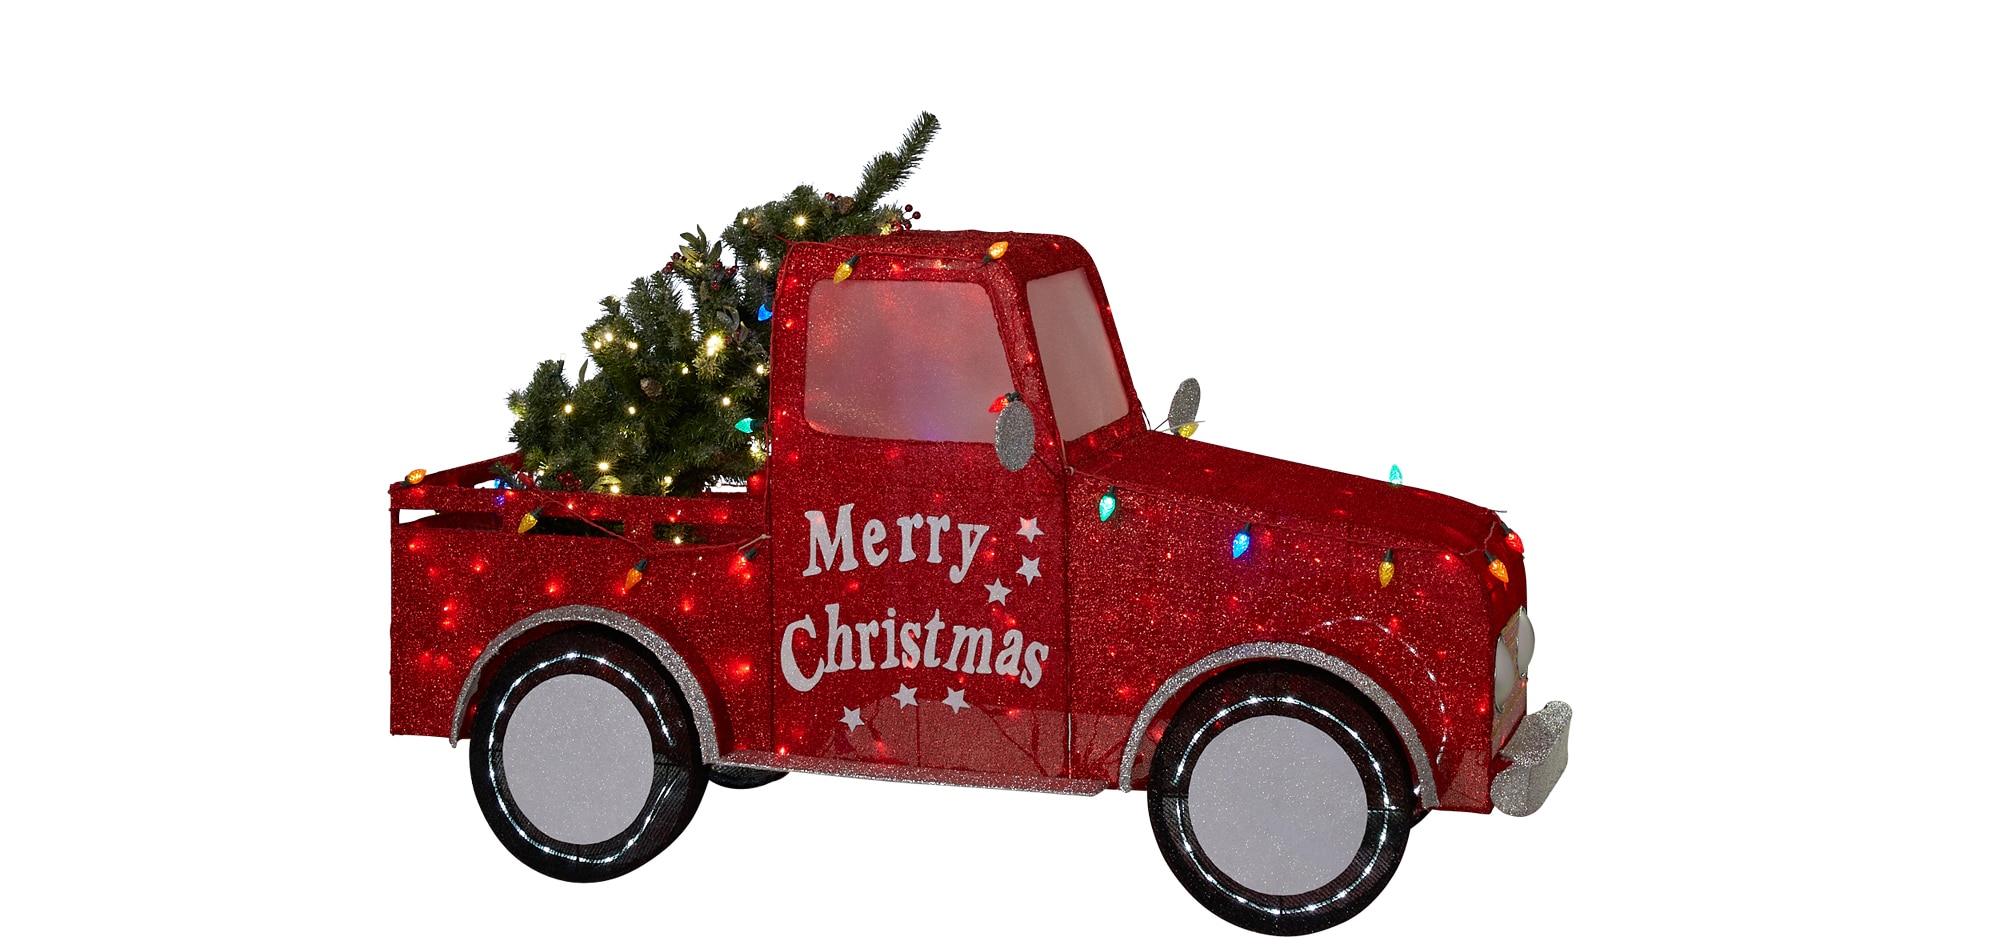 2 Holiday Red Metal Collectible Christmas Decor Pick Up Trucks FREE SHIPPING New 